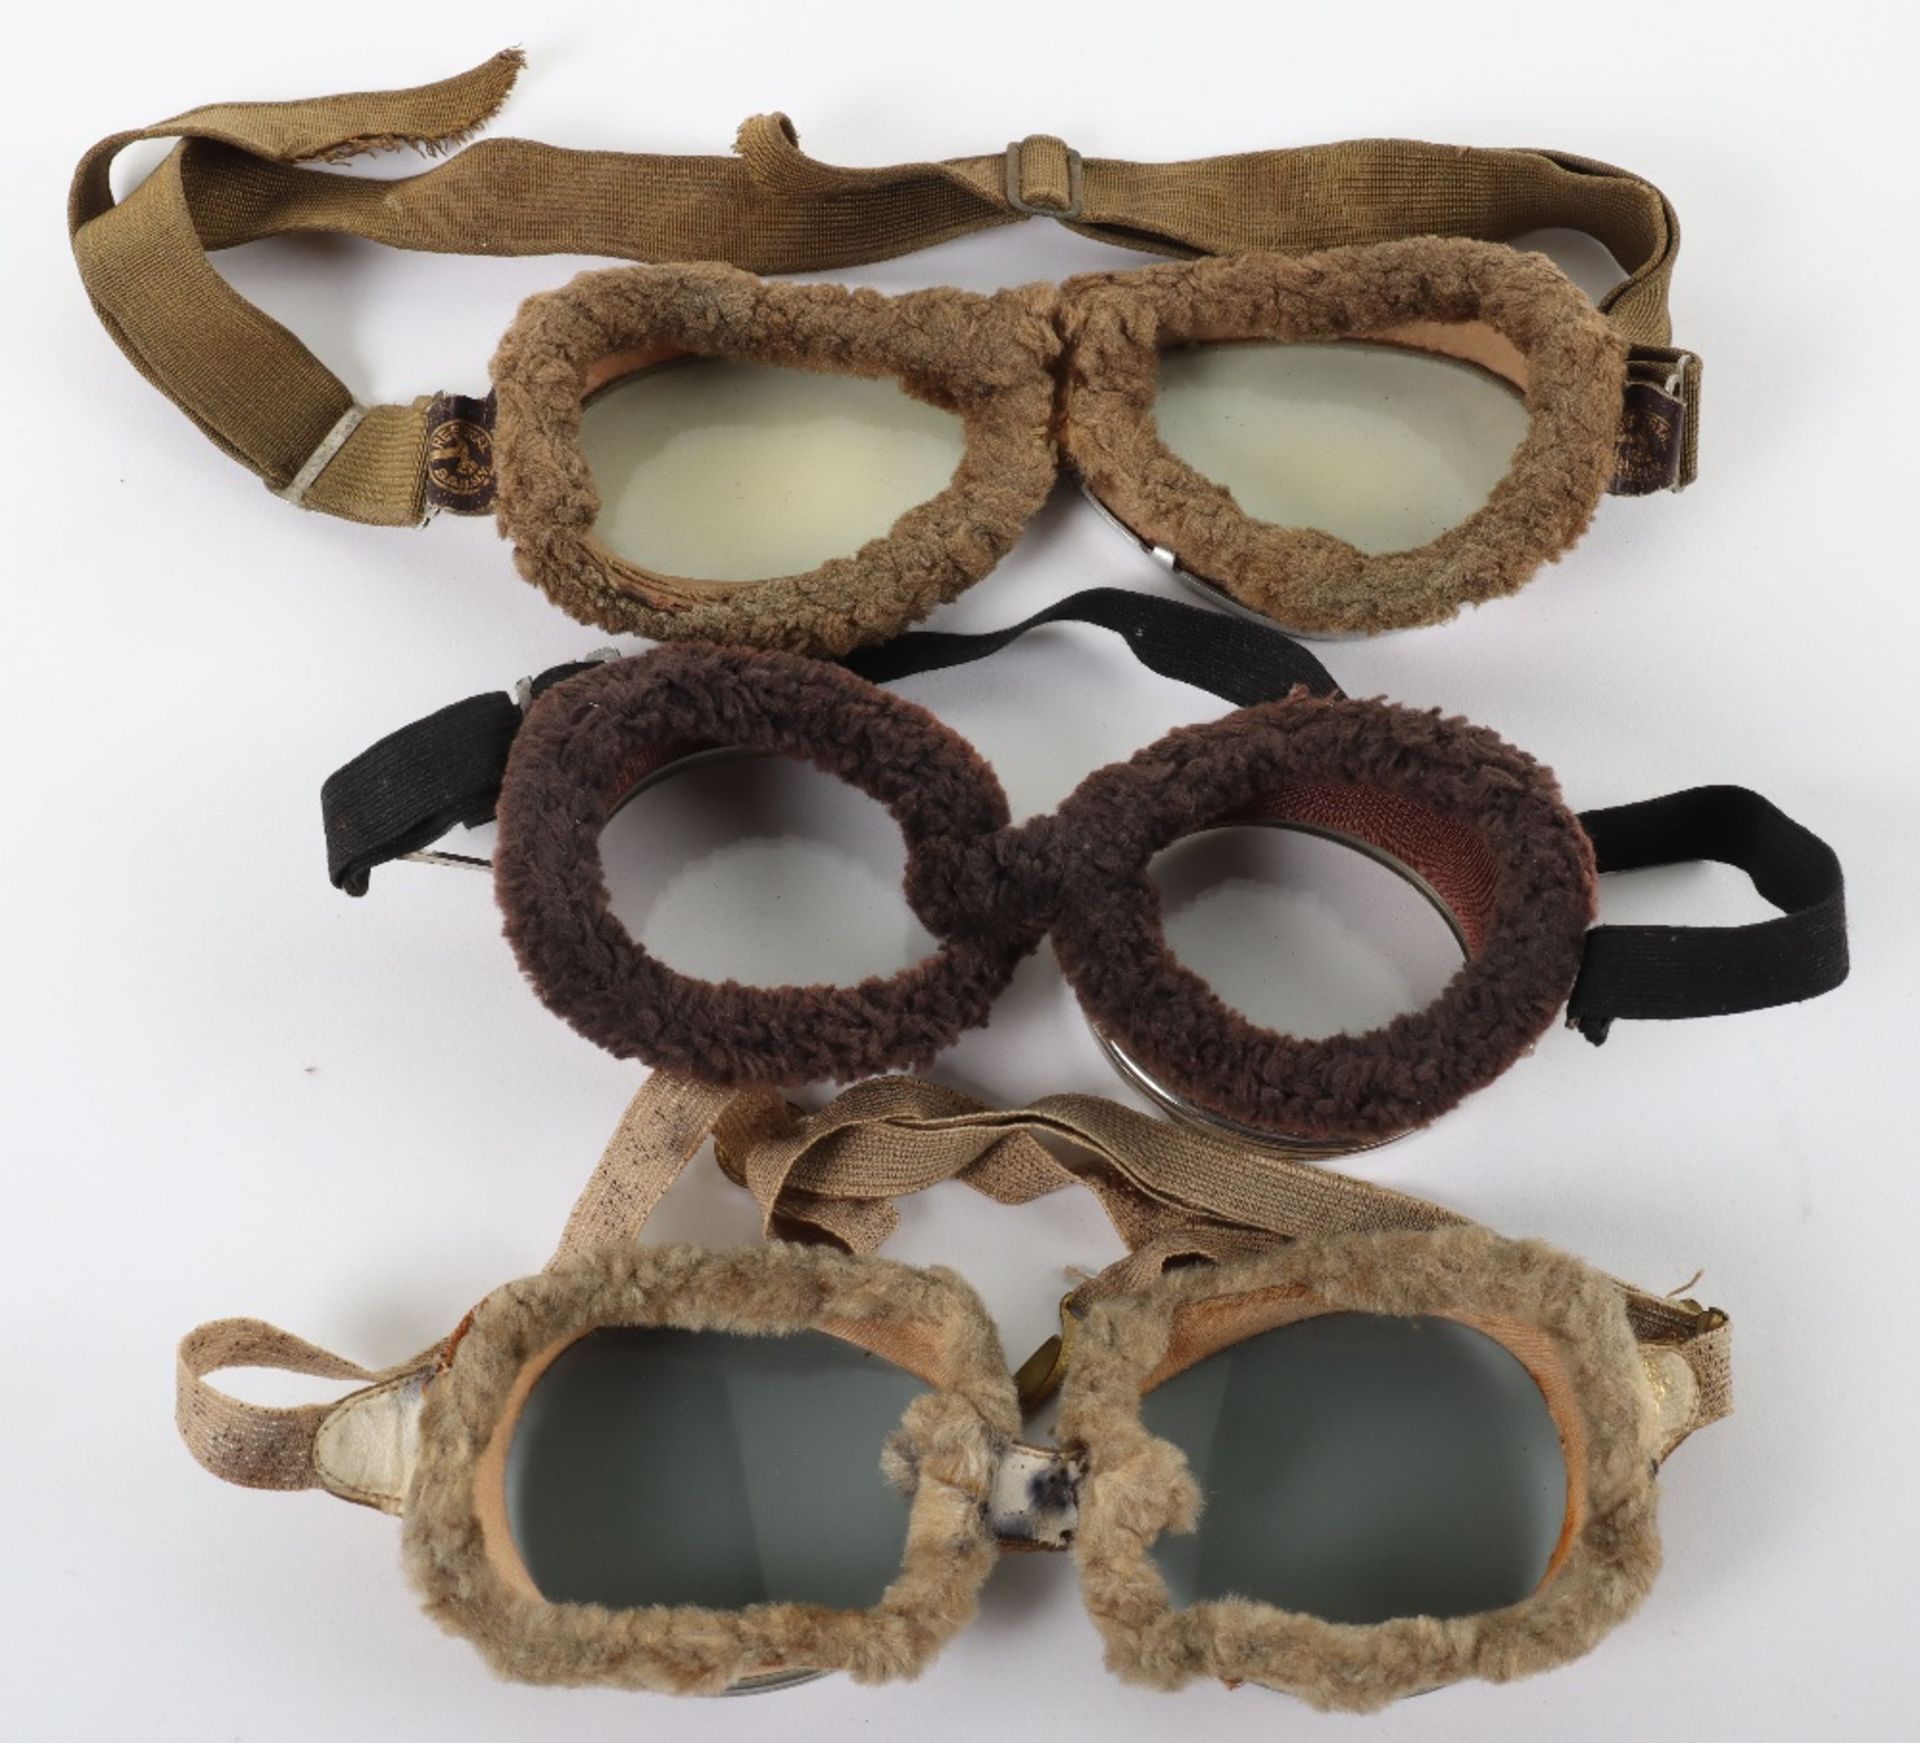 3x Pairs of Early Aviators Goggles - Image 2 of 4